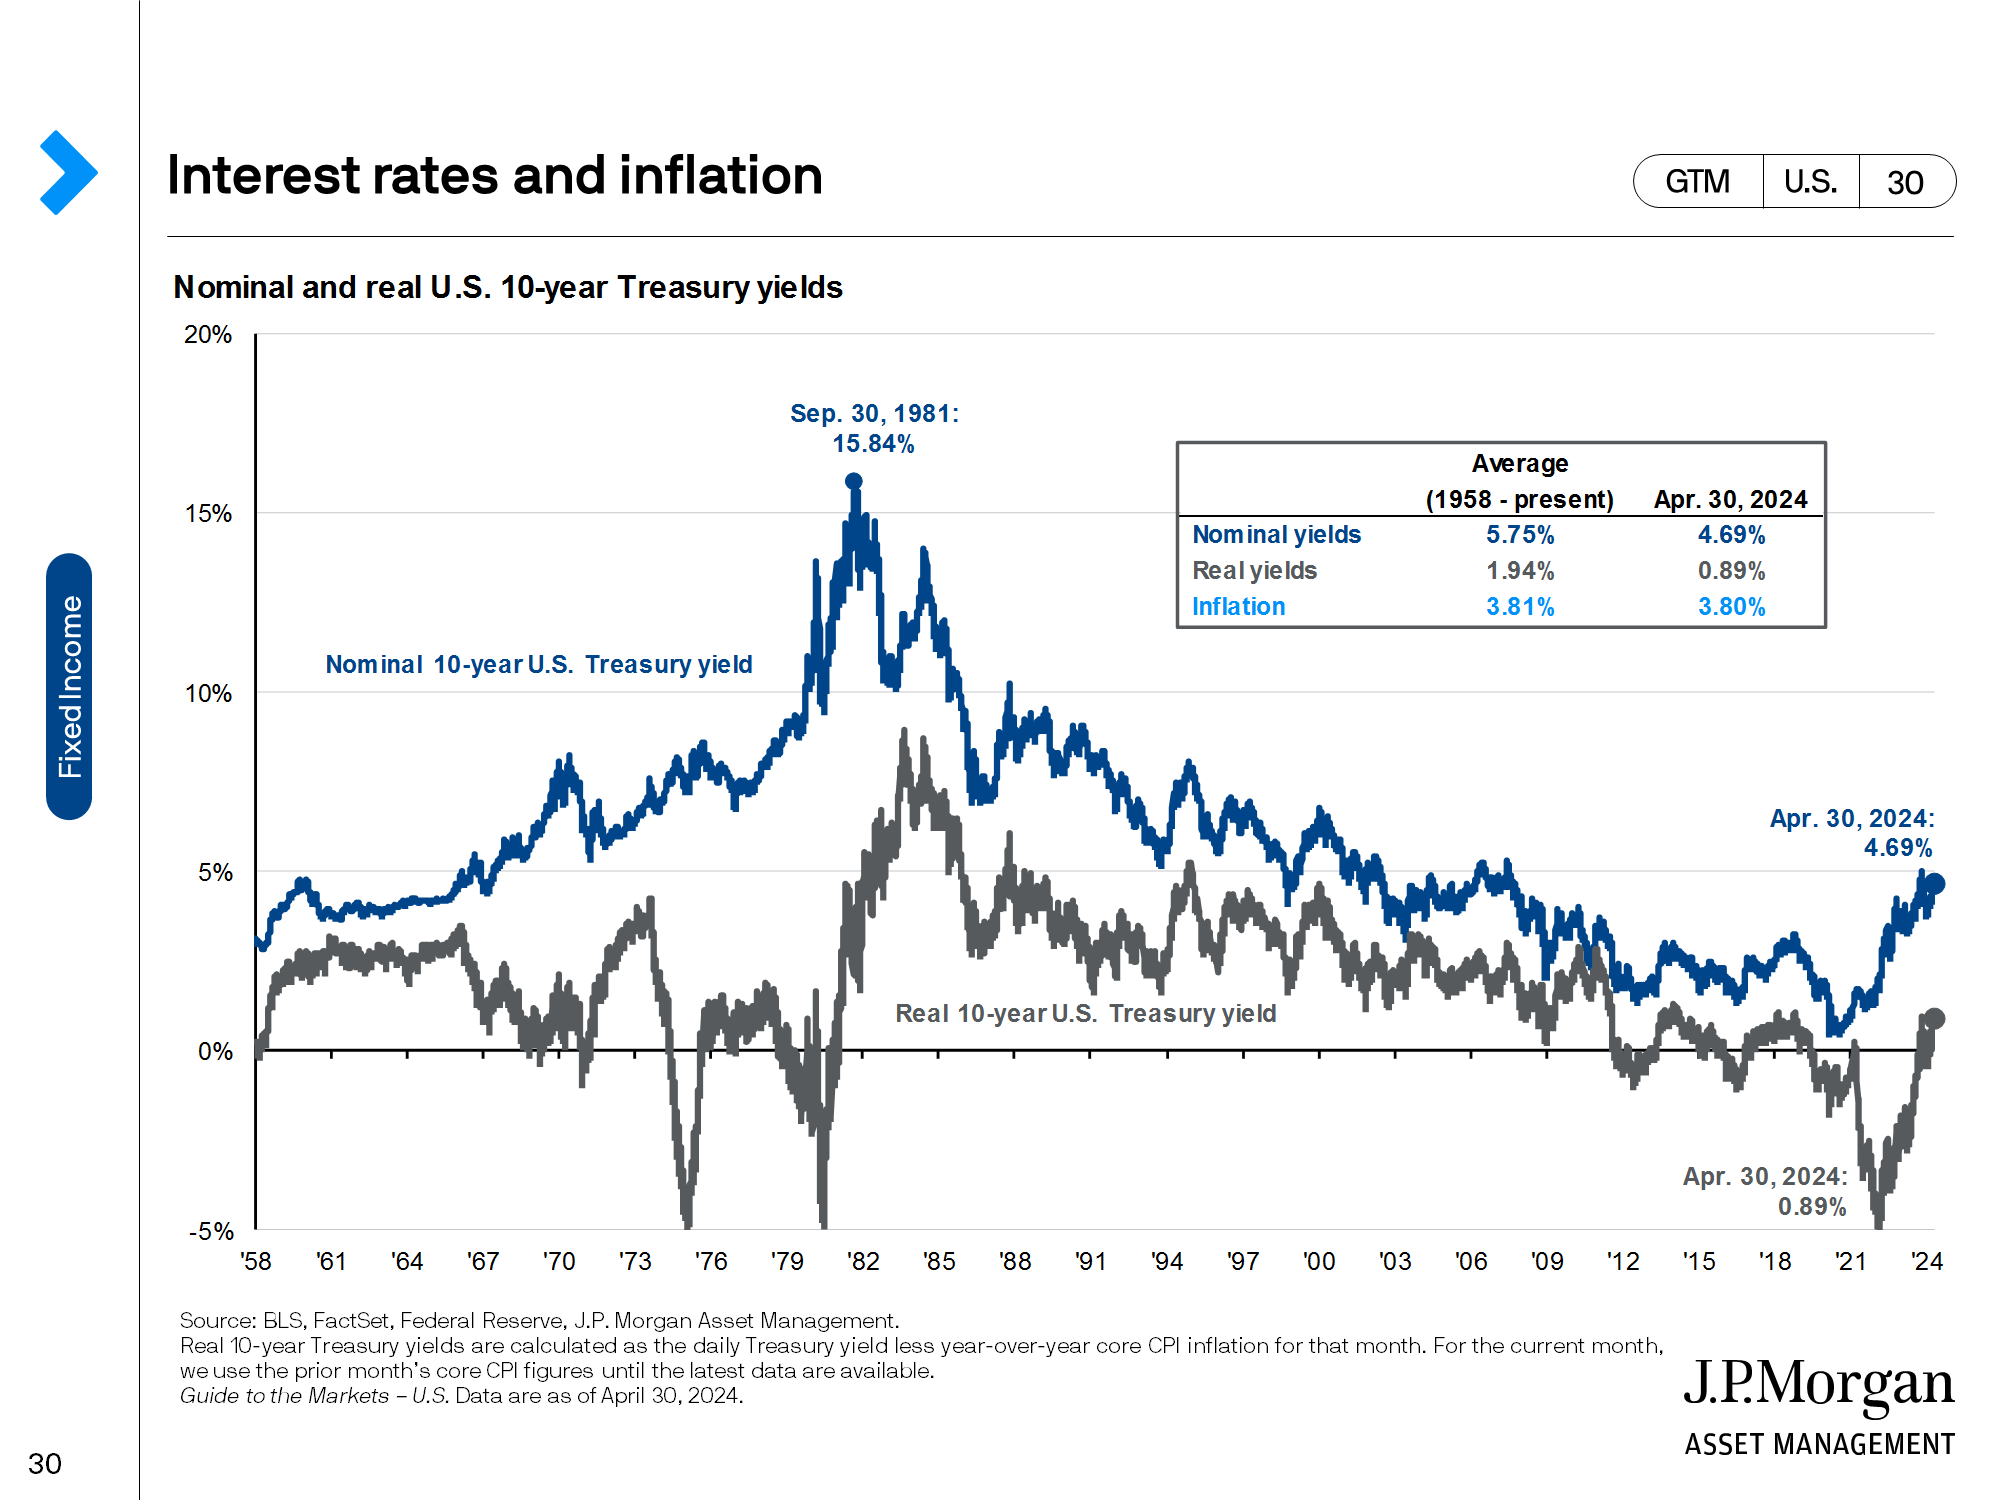 Inflation drivers and expectations